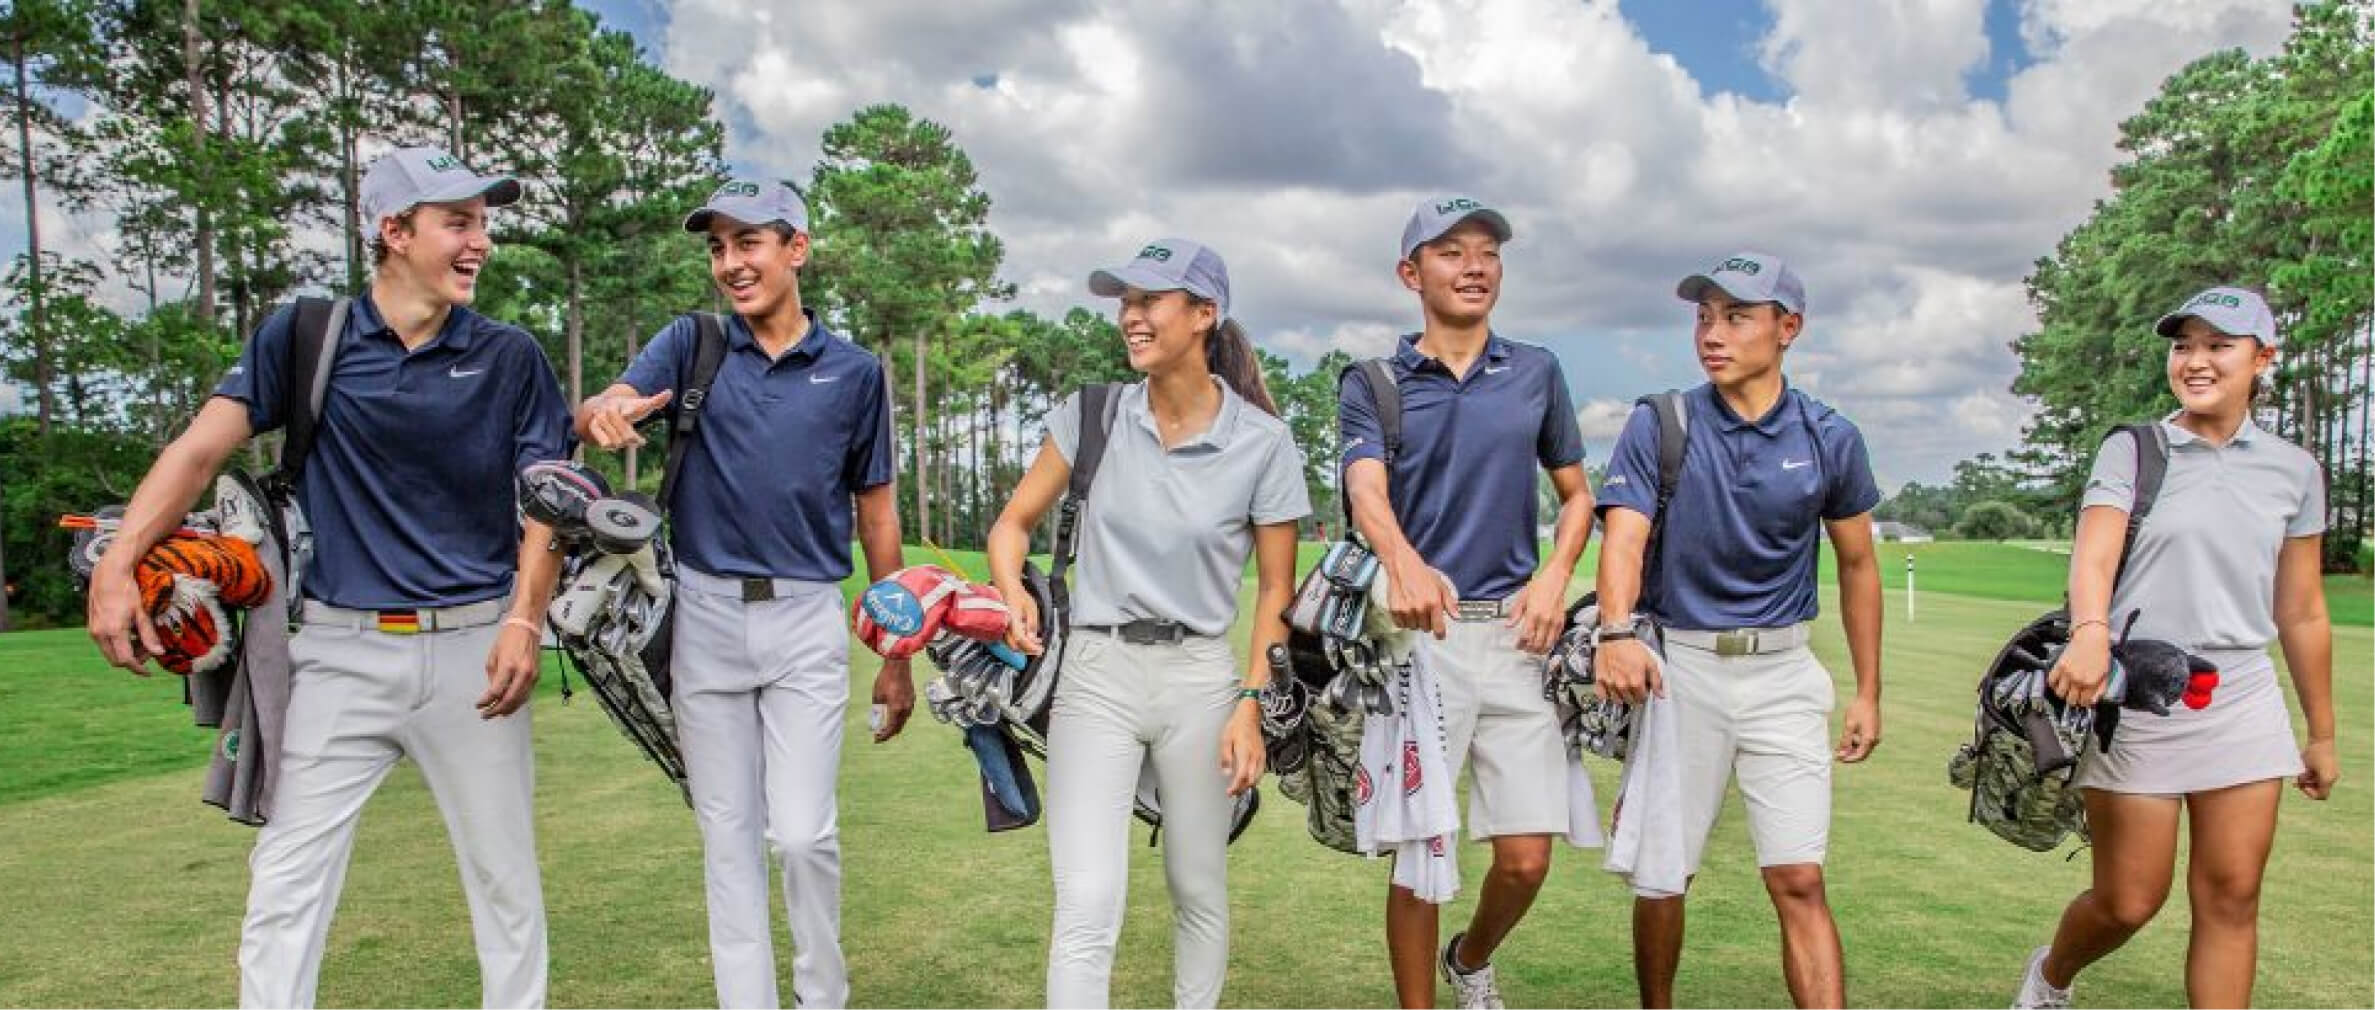 Group of IJGA golfers smile and walk together on the golf course